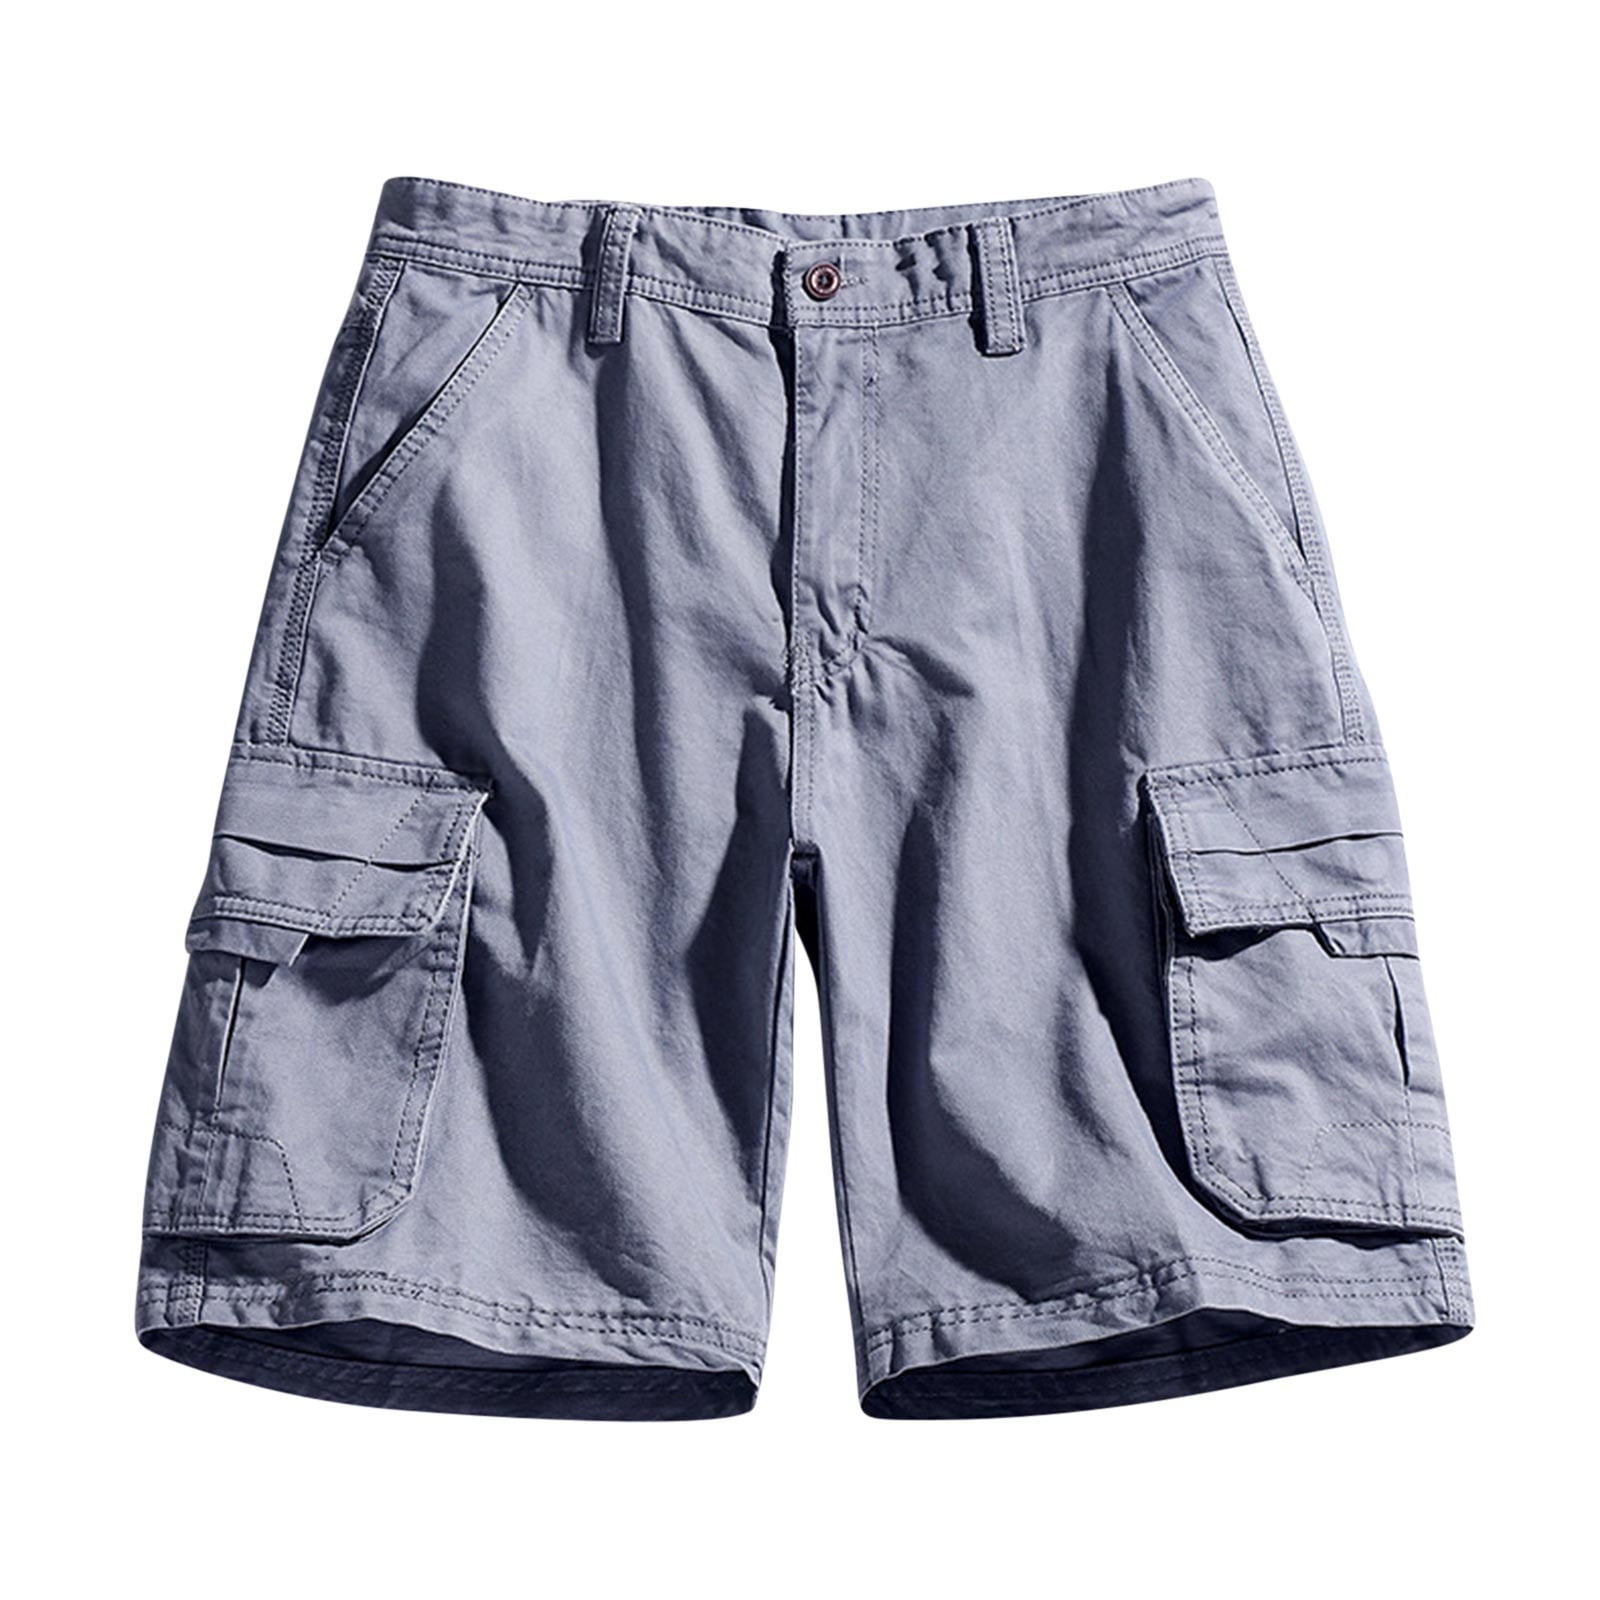 cllios Cargo Shorts for Men Relaxed Fit Multi Pockets Shorts Work ...